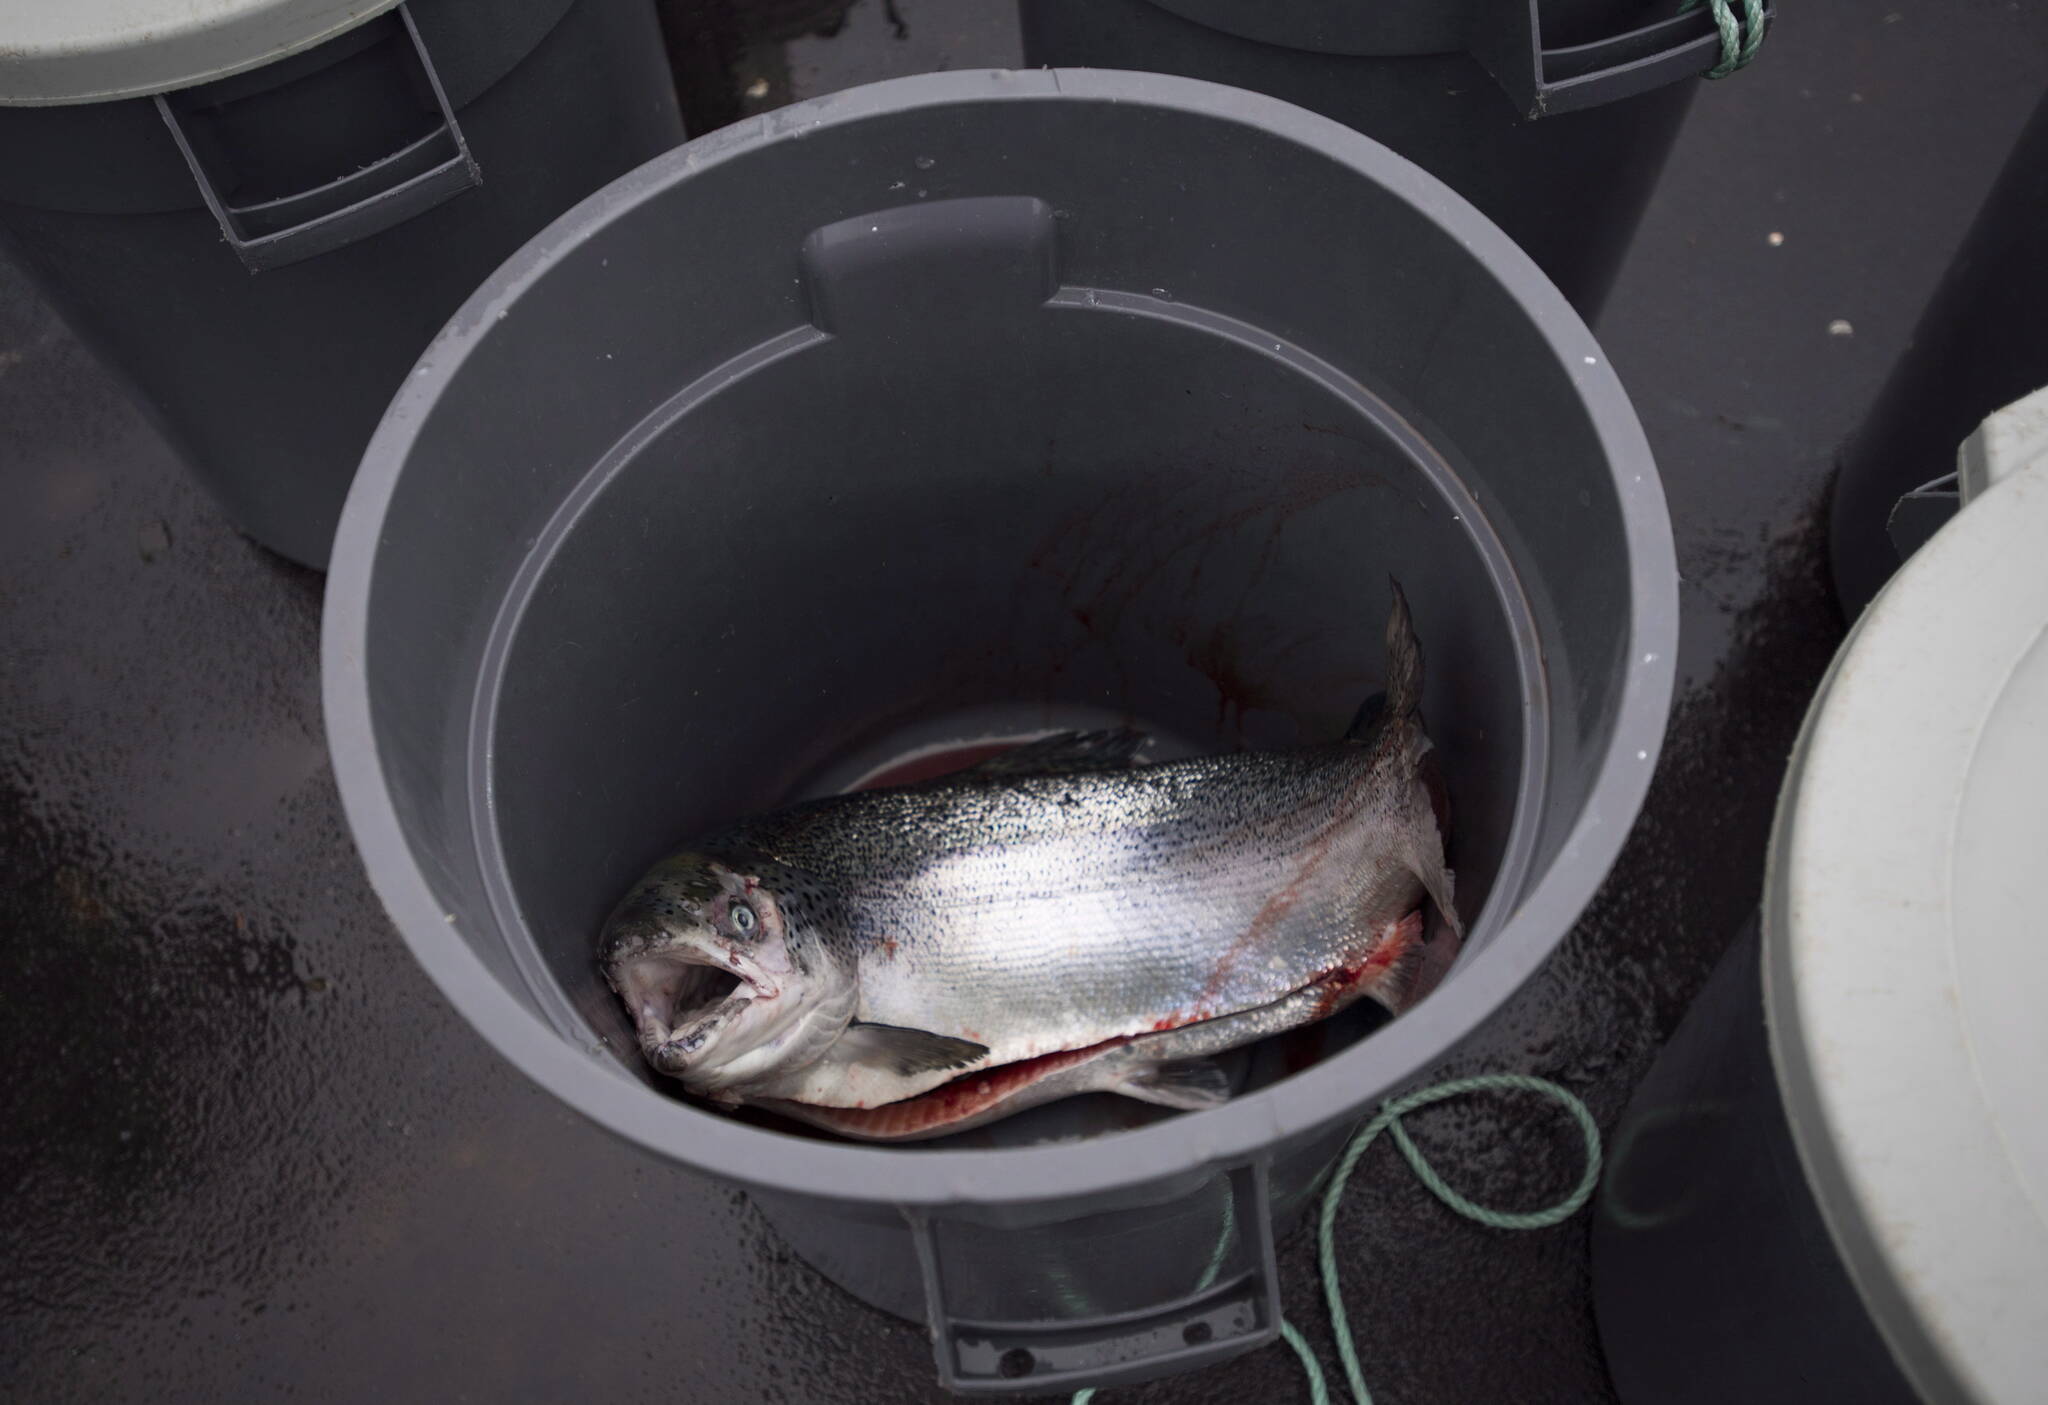 An Atlantic salmon is seen collected for samples from during a Department of Fisheries and Oceans fish health audit at the Okisollo fish farm near Campbell River, B.C. Wednesday, Oct. 31, 2018. THE CANADIAN PRESS /Jonathan Hayward